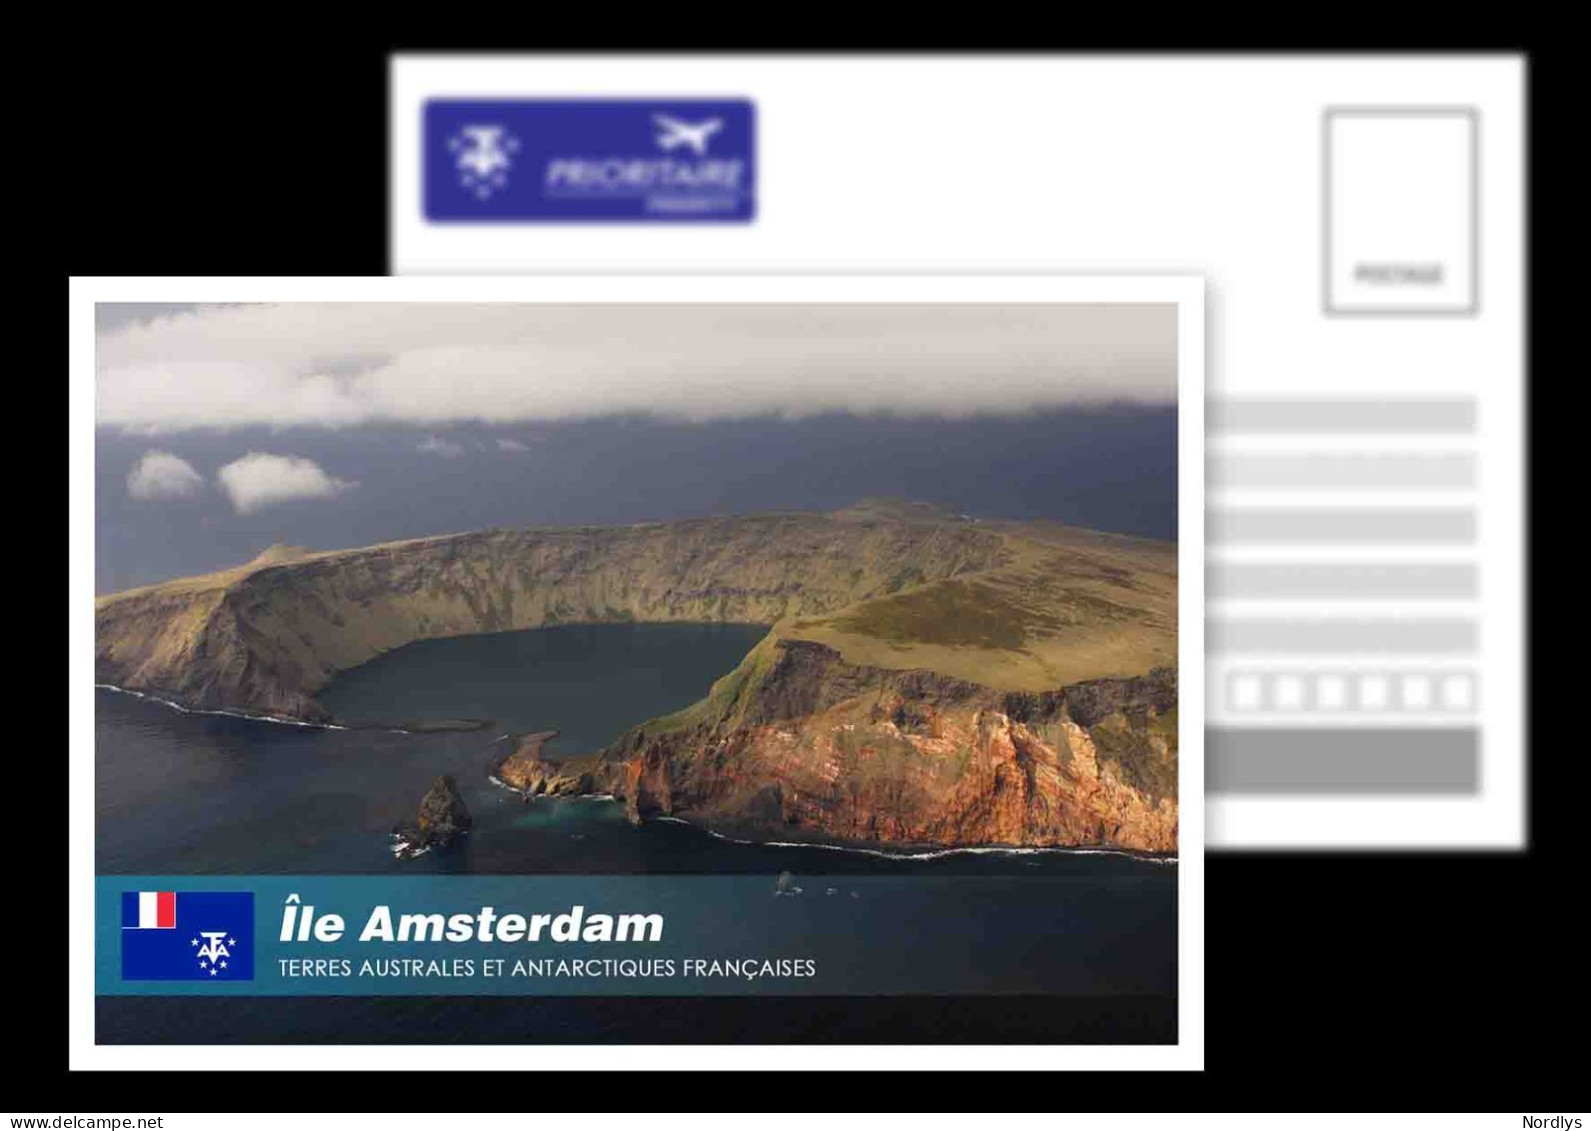 TAAF / French Antarctic Territory / Ile Amsterdam / Postcard / View Card - TAAF : Terres Australes Antarctiques Françaises